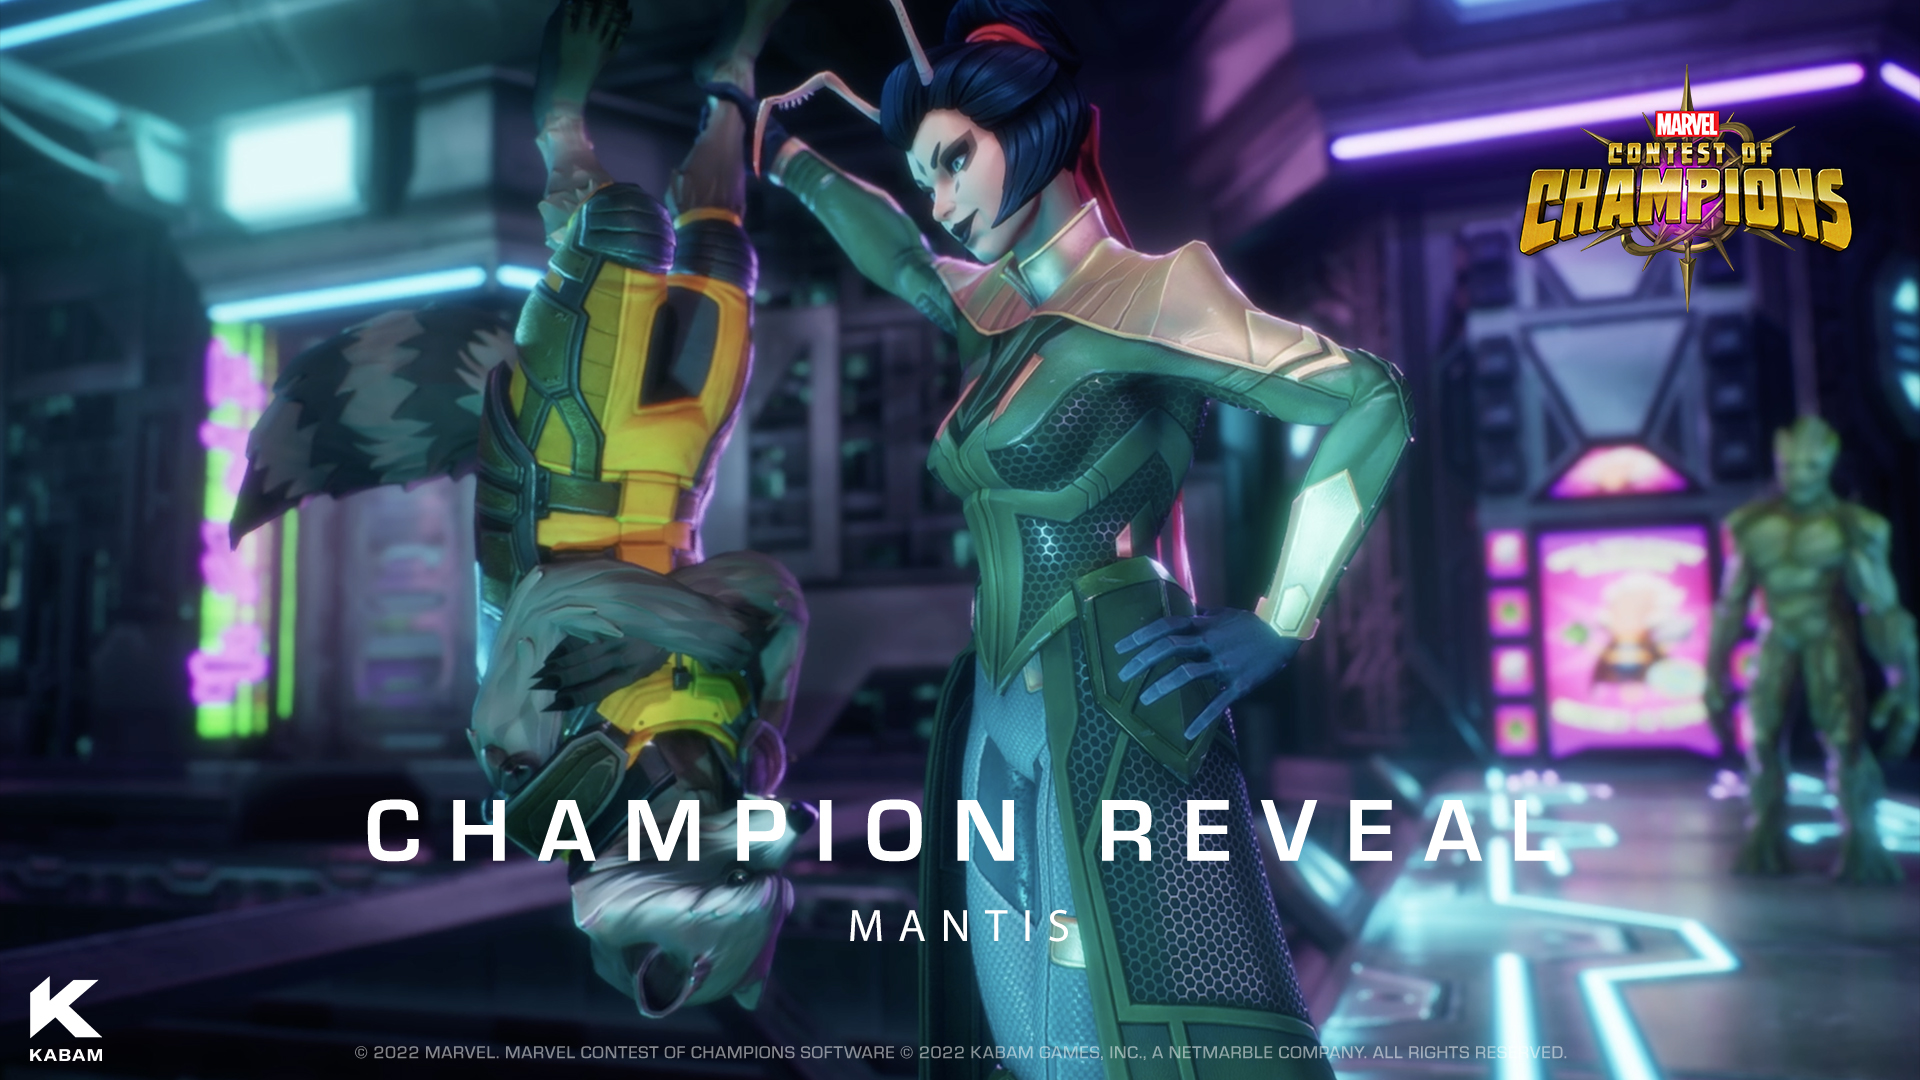 Marvel Contest Champions on Twitter: "Rocket and Groot have got their eyes on some spilled units, though they to get through Mantis to get them. Find out who gets their